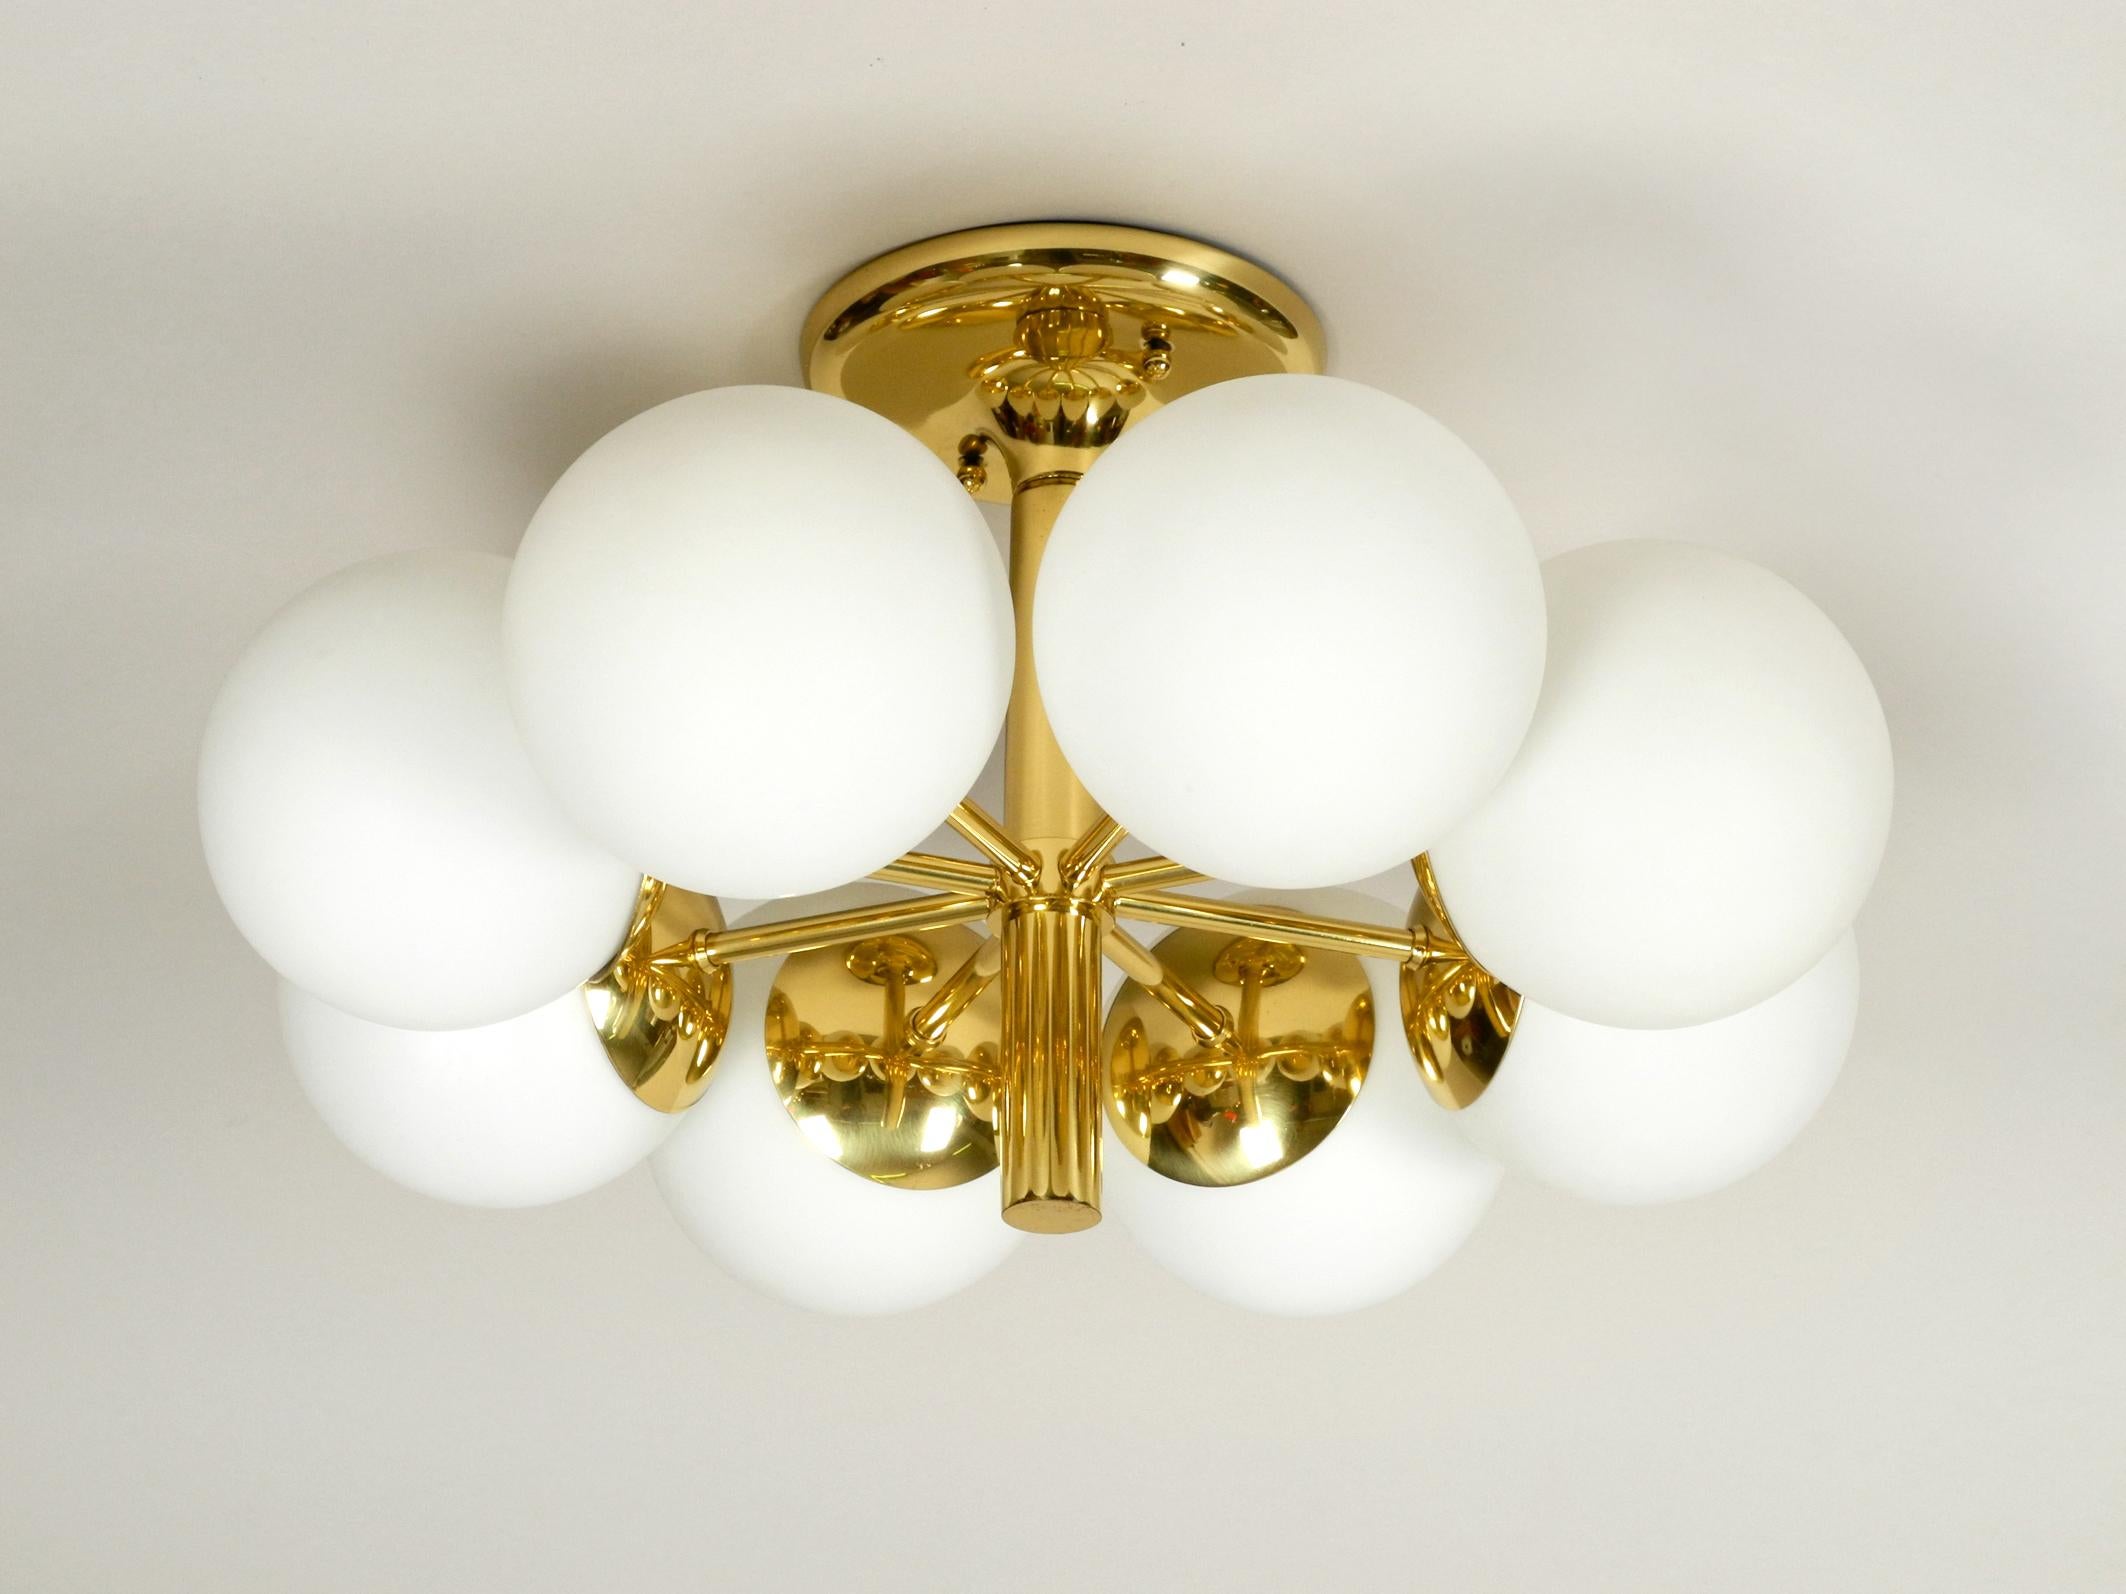 Space Age Beautiful 1960s Brass Ceiling Lamp with 8 Glass Globes by Kaiser Leuchten 